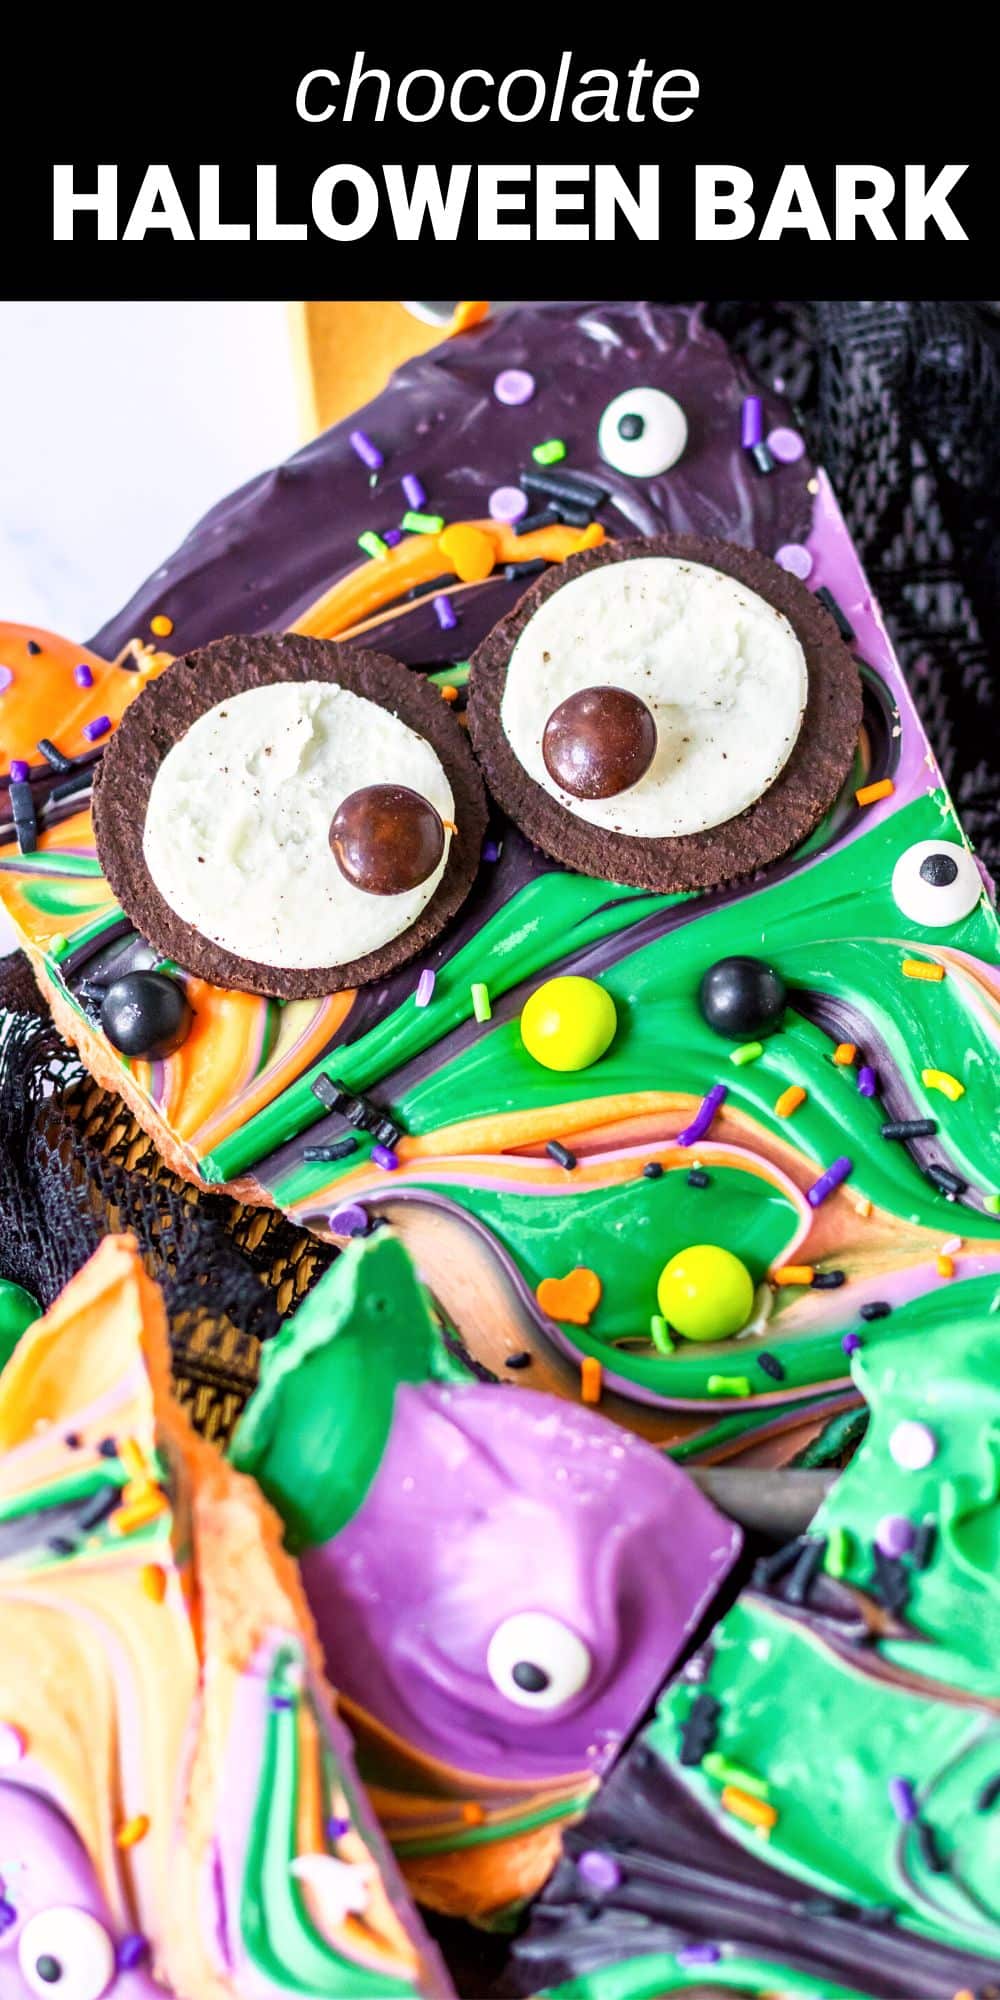 This colorful Halloween bark is a fun treat that incorporates all your favorite Halloween treats. You’ll want to make this fun and festive chocolate bark for all your Halloween events. 